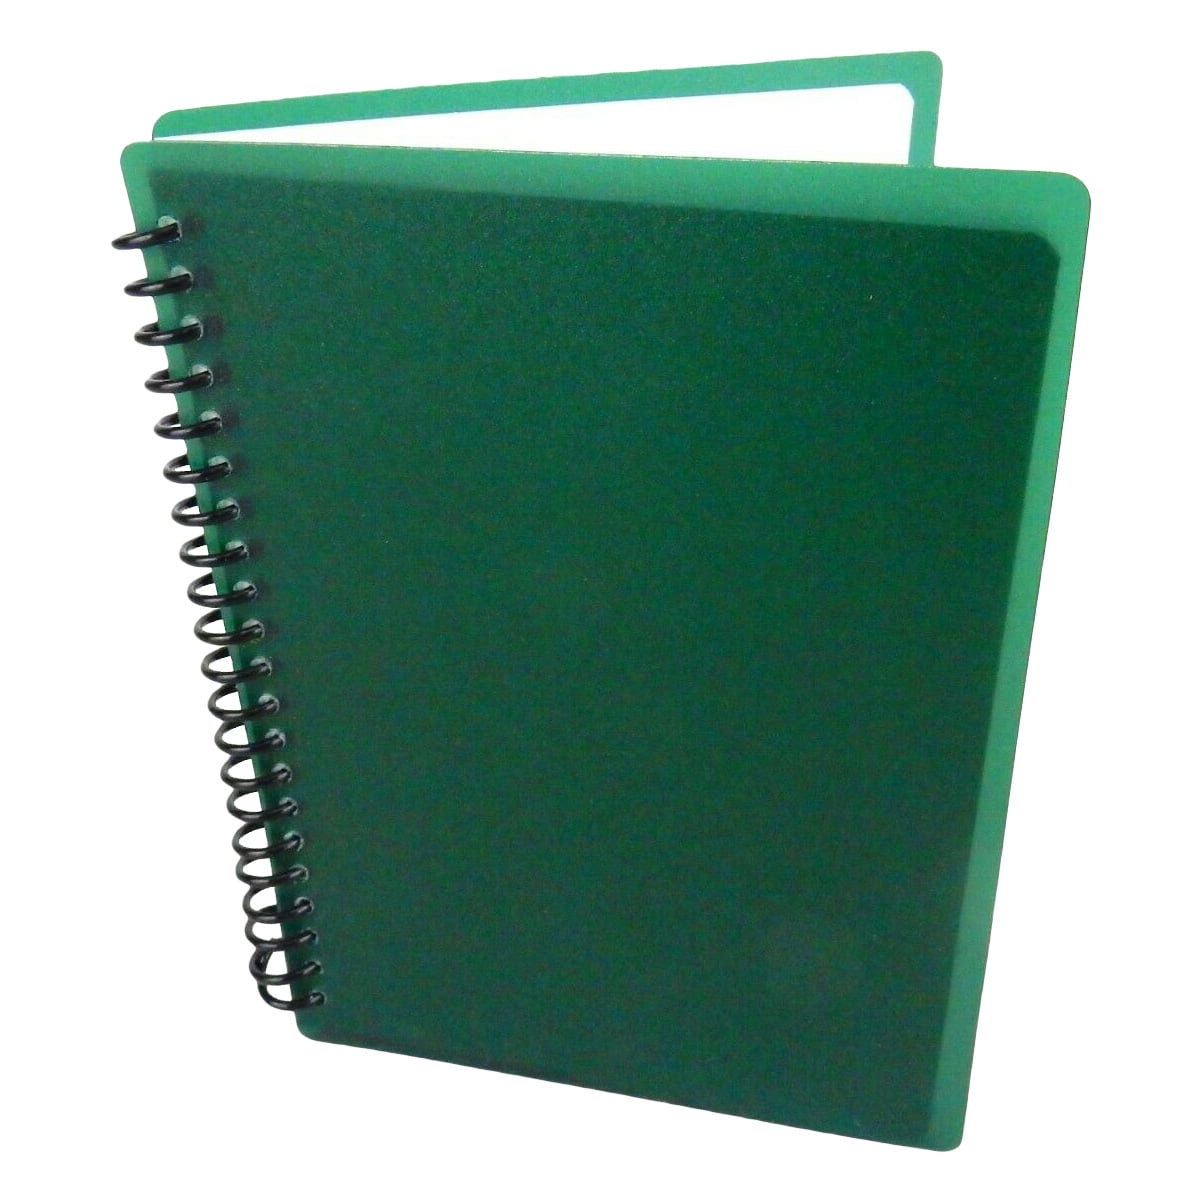 Details about   A5 House Colorful Spiral Coil Plastic Cover Notebook/Journal School Notepad 